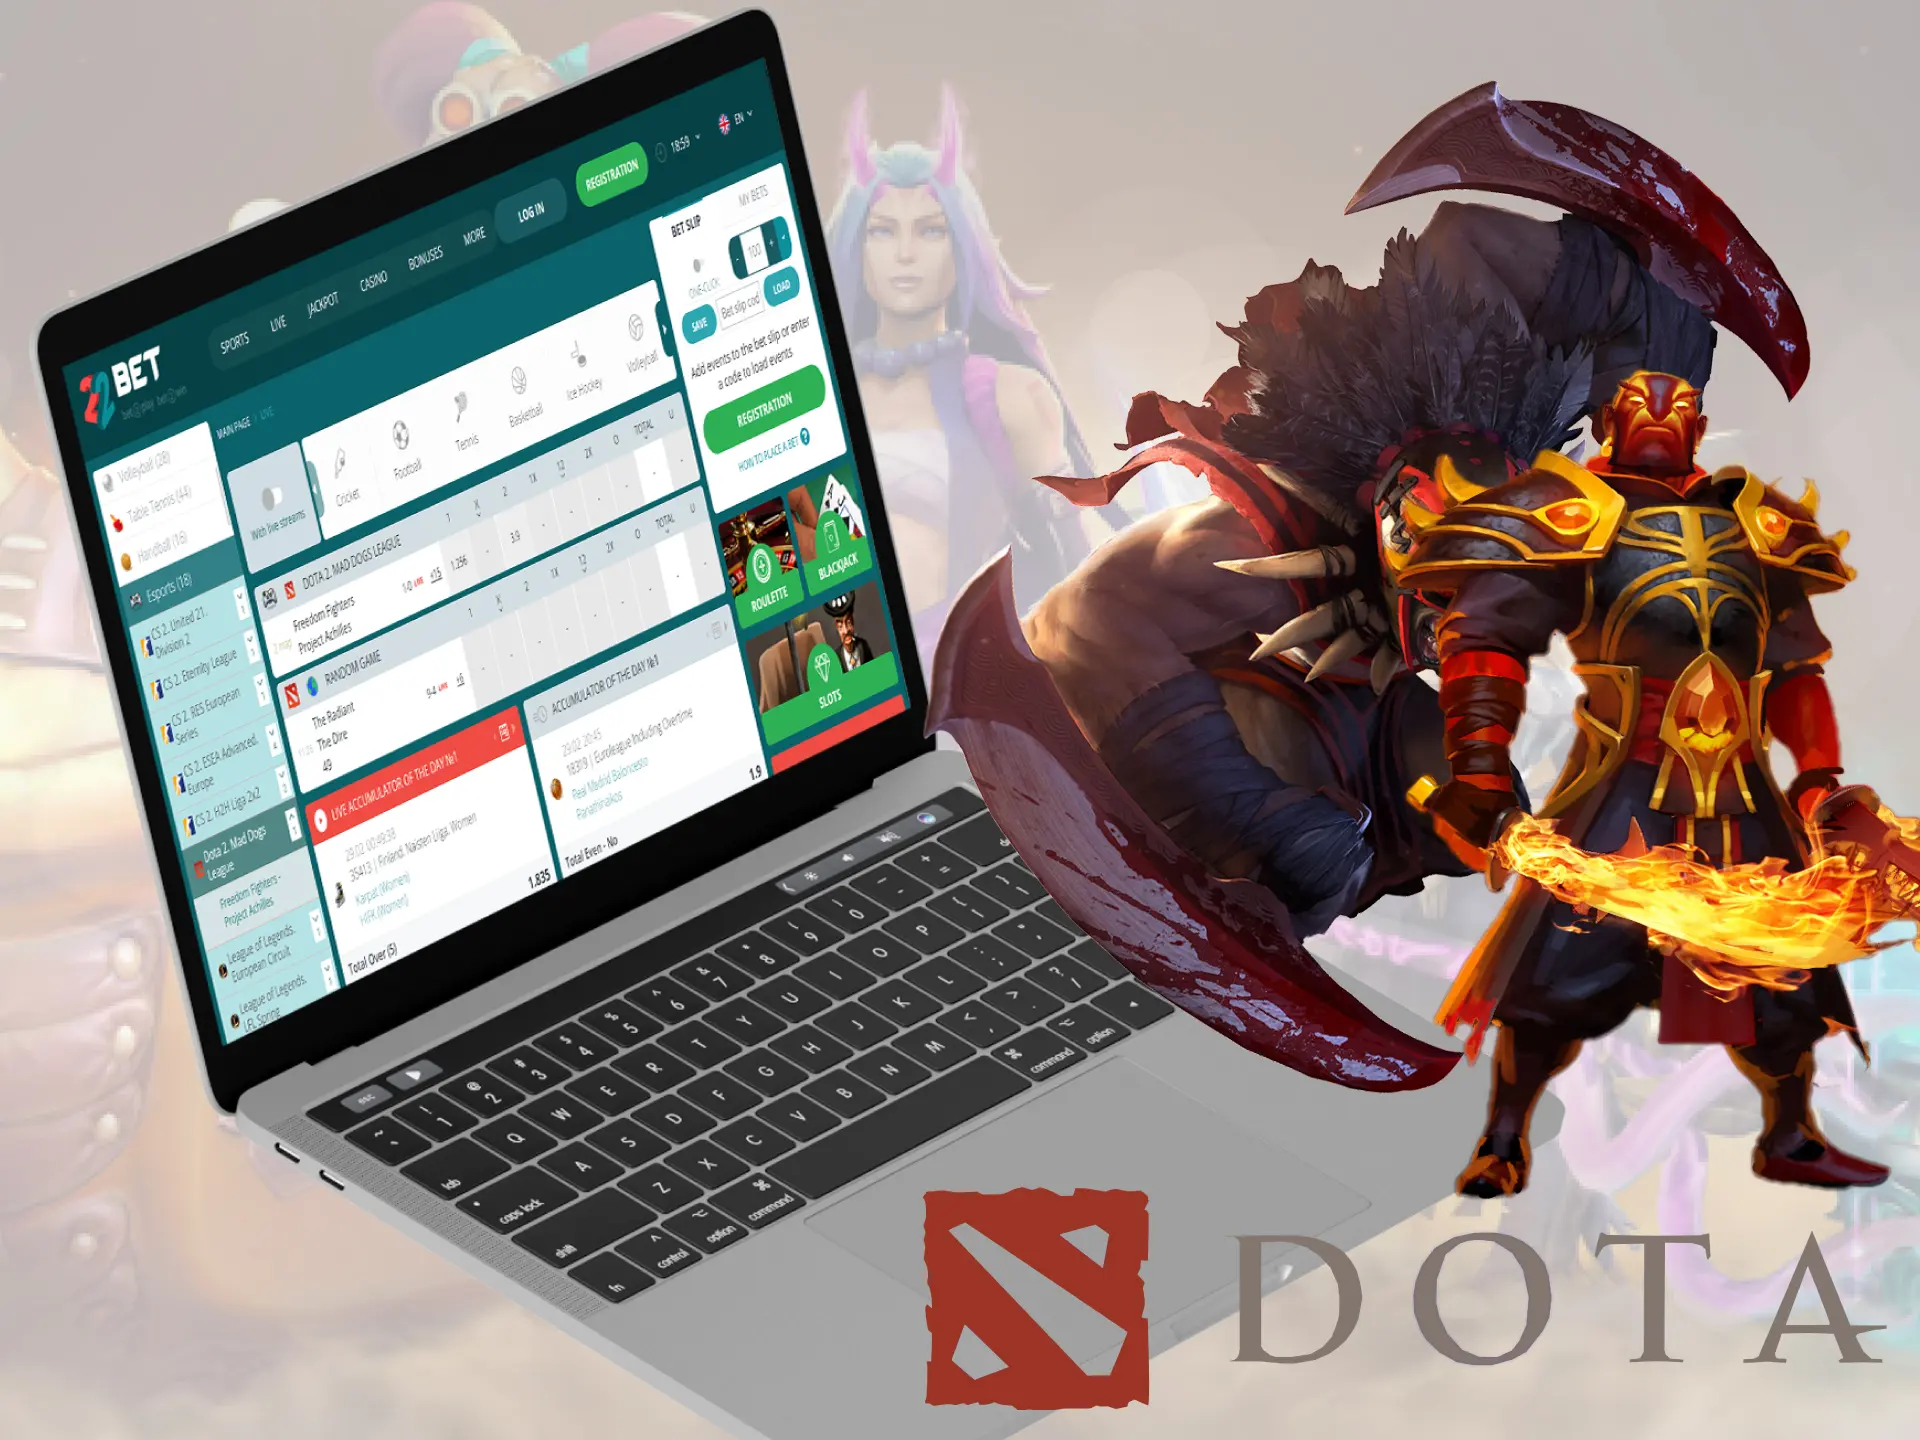 Check out significant Dota 2 tournaments to place your bets.